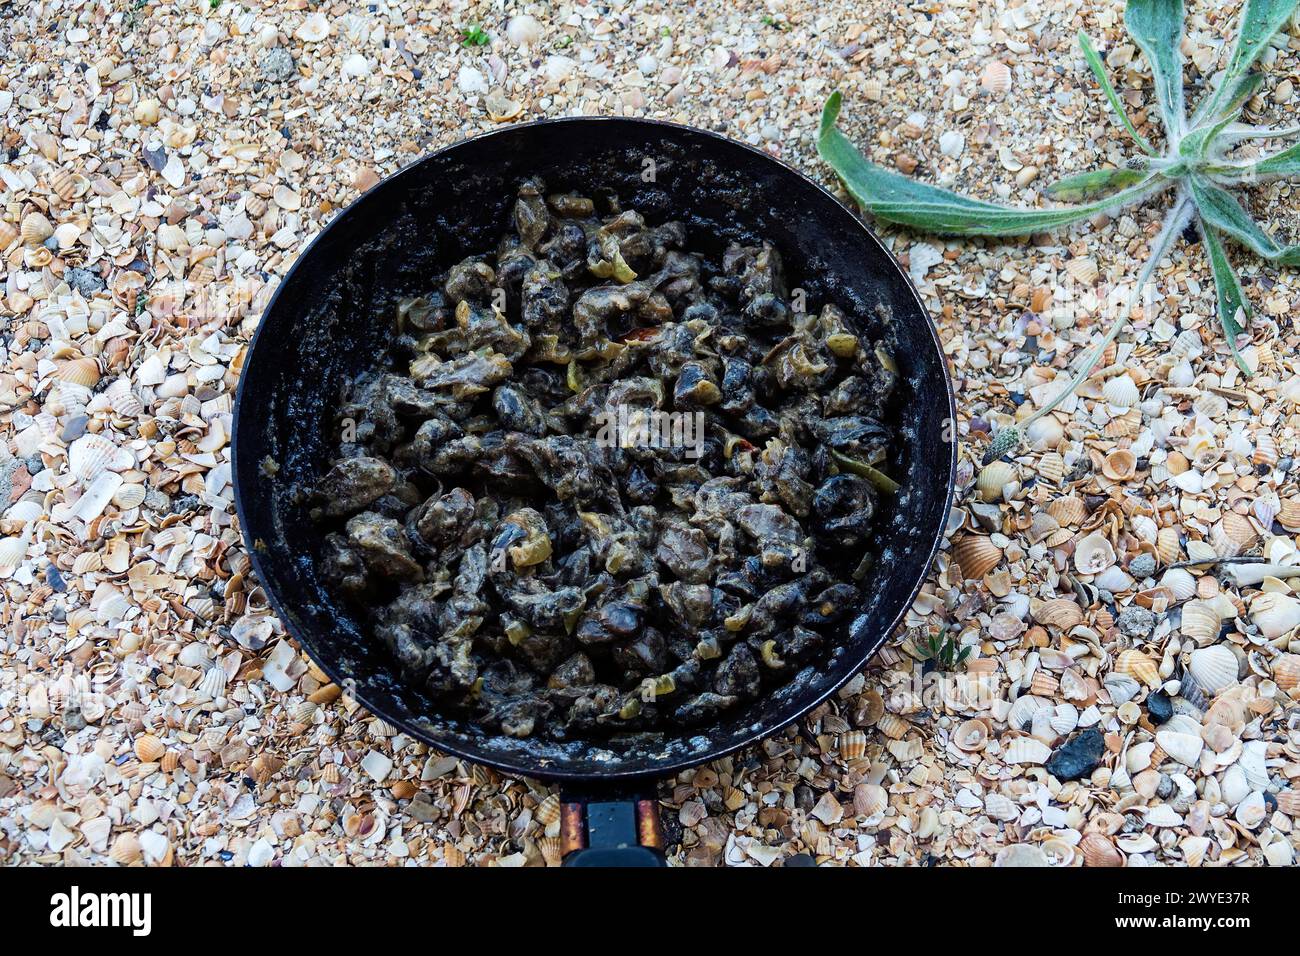 Hiker's food at sea shore. Grape snails fried in a frying pan with vegetables Stock Photo